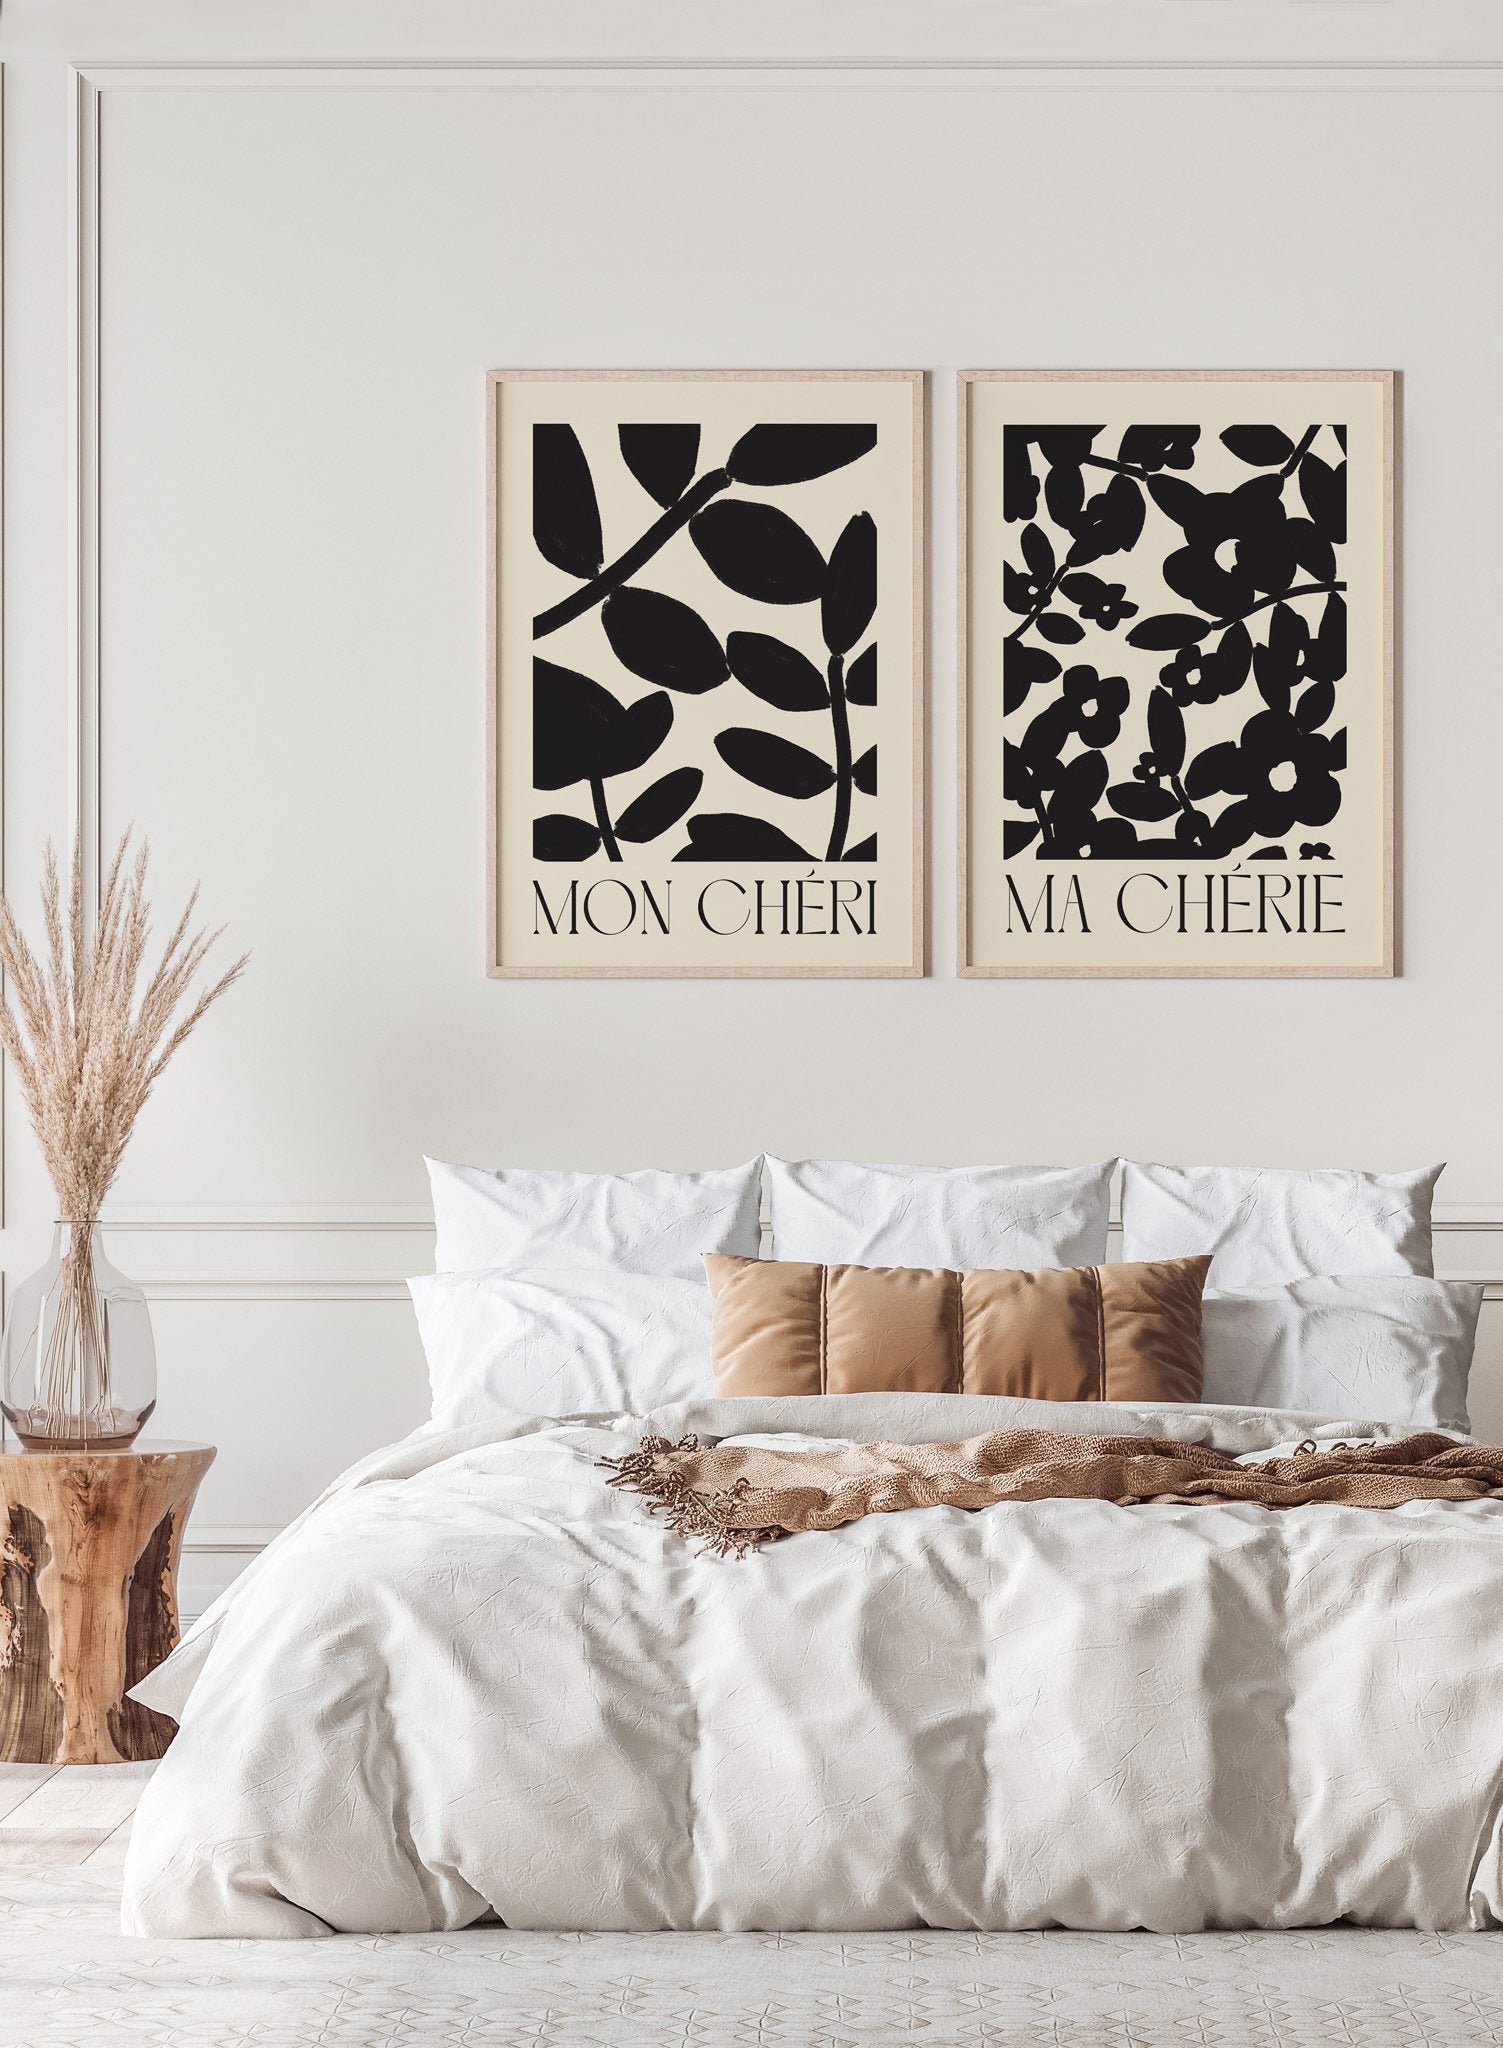 "Mon Cheri" is a minimalist illustration poster by Opposite Wall in beige and black of an abstract botanical pattern and the words ‘my darling’ in French typography.